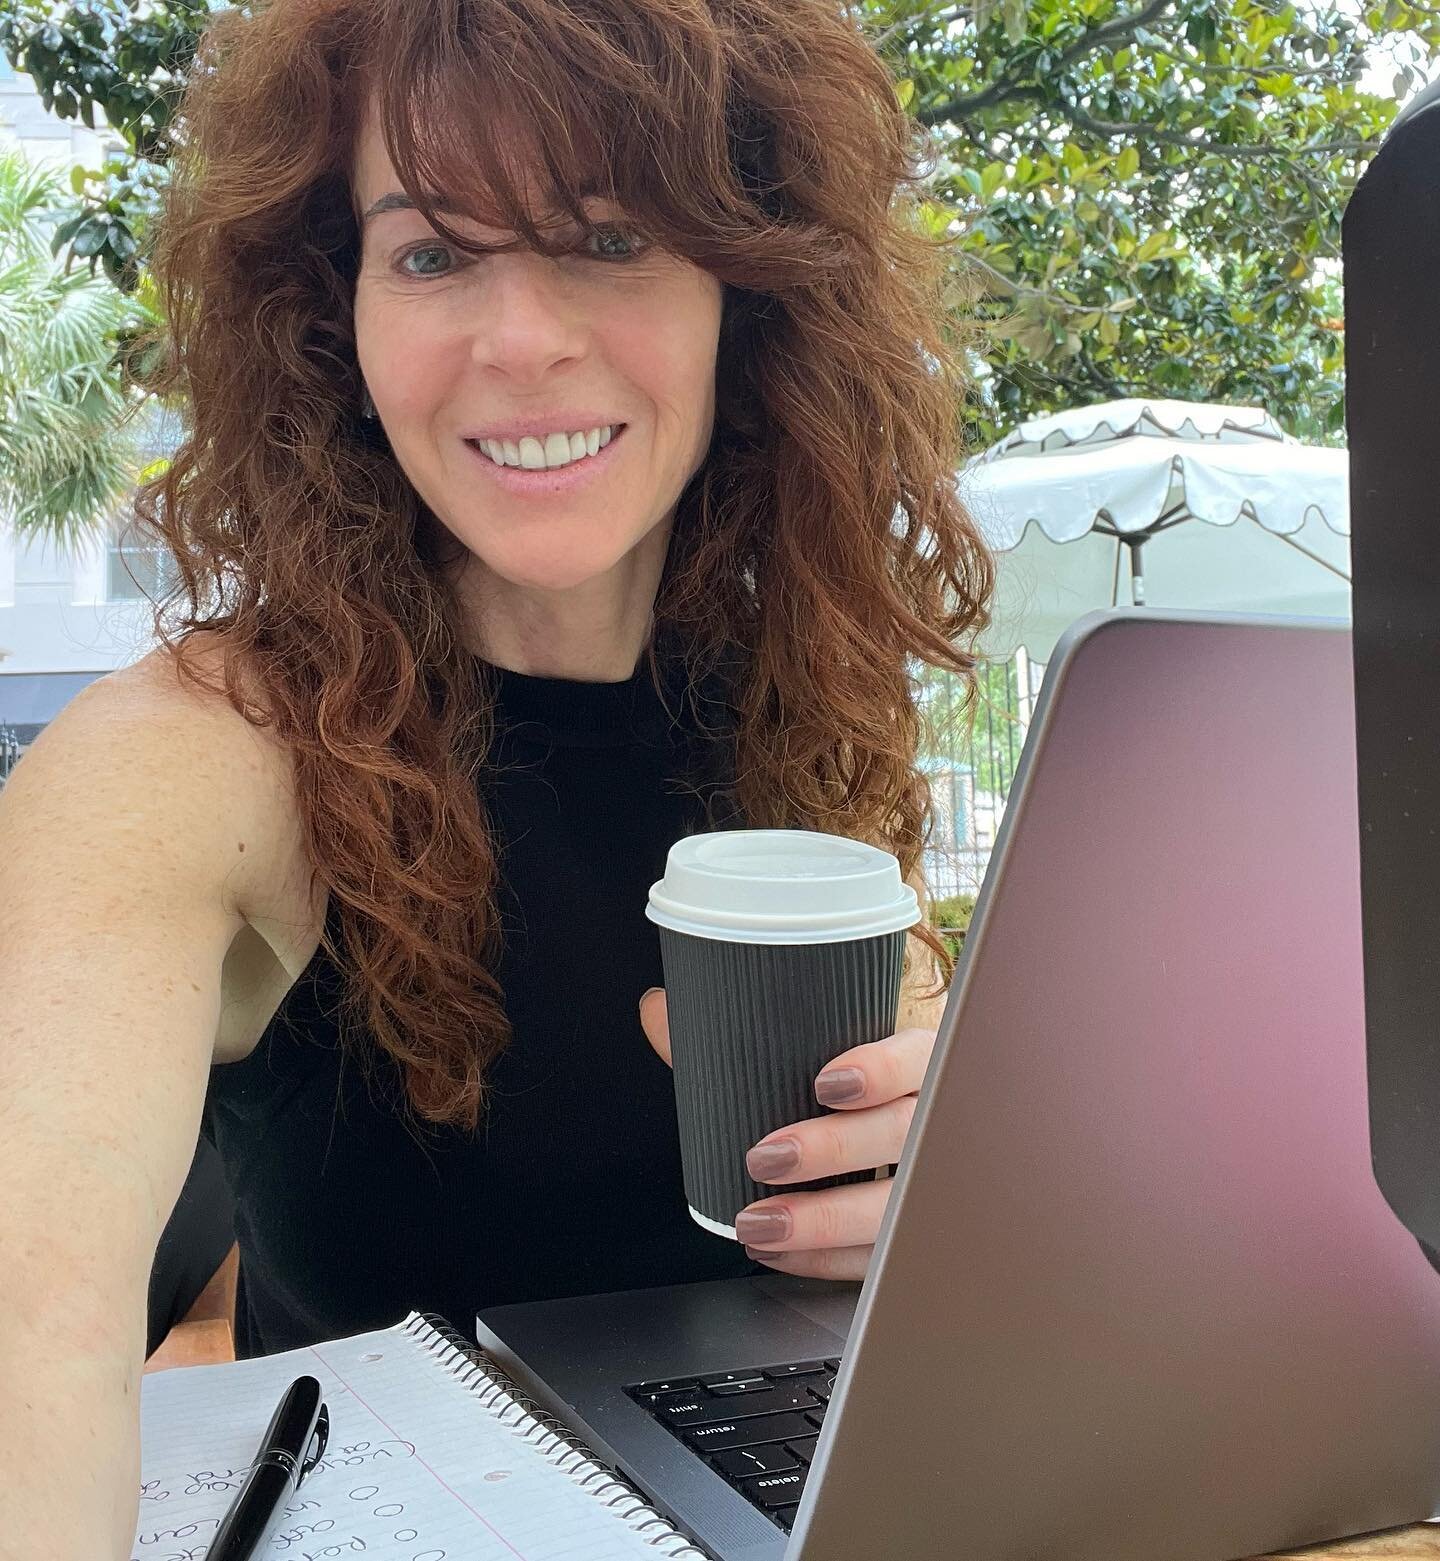 What a perfect morning to sit outside and get some work done. Amazing how a little sunshine and a new environment can be so inspiring. Finally working on some of the coaching sessions I&rsquo;ve needed to organize.